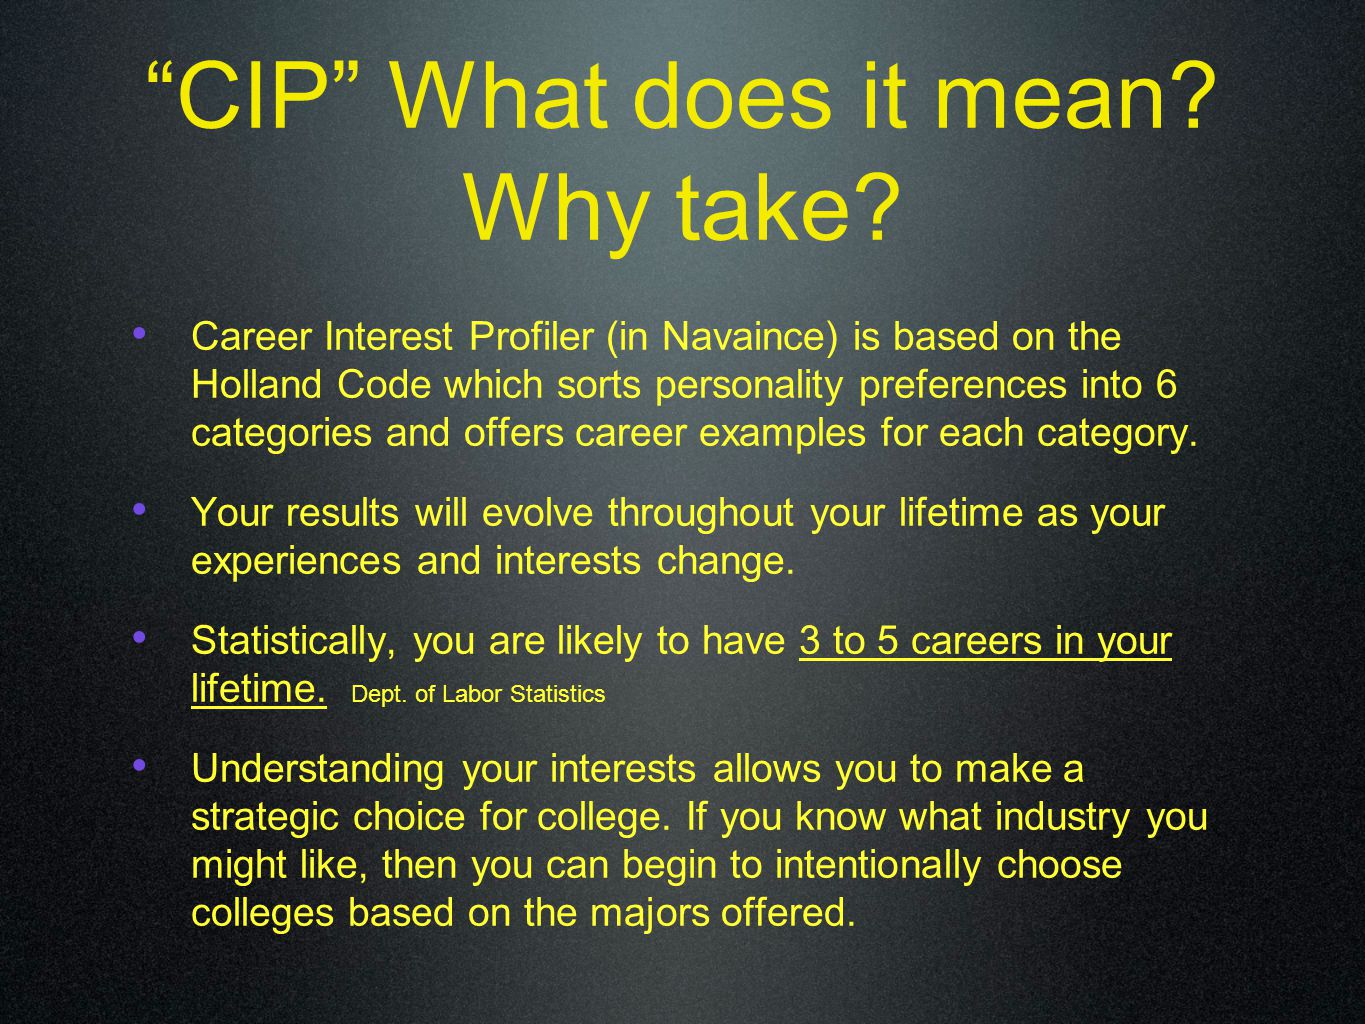 Today's Agenda Career Interest Profiler (CIP) results. Explain Viable Job  Markets Product Life Cycles: Emerging, - ppt download